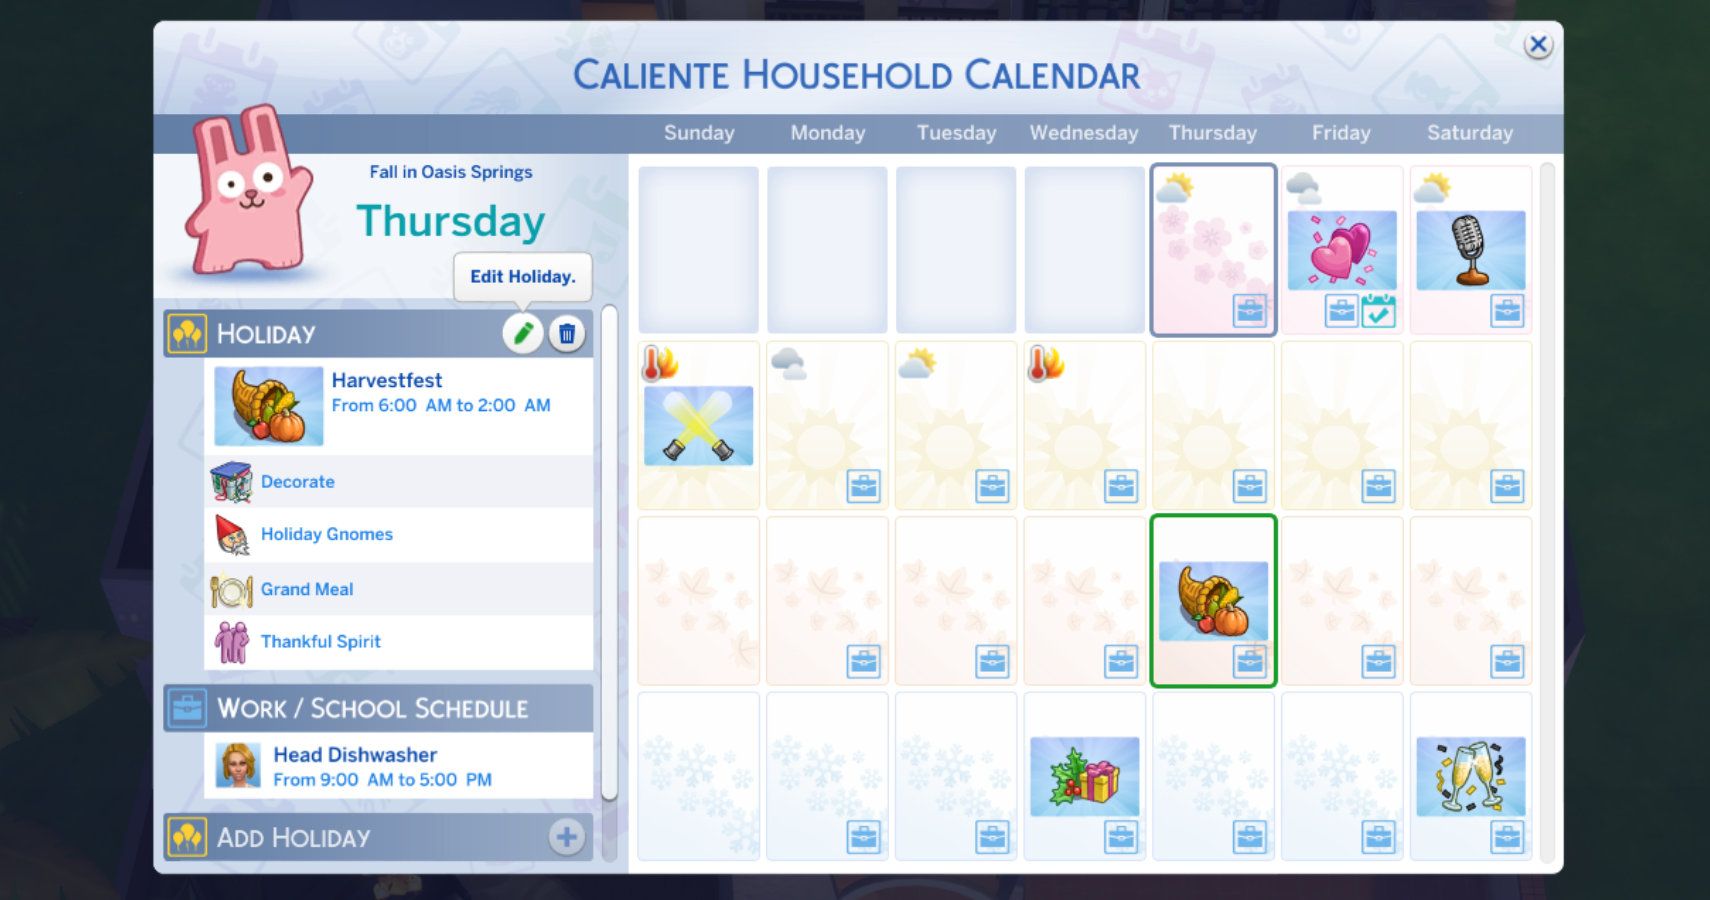 The calendar showing how to edit a holiday.